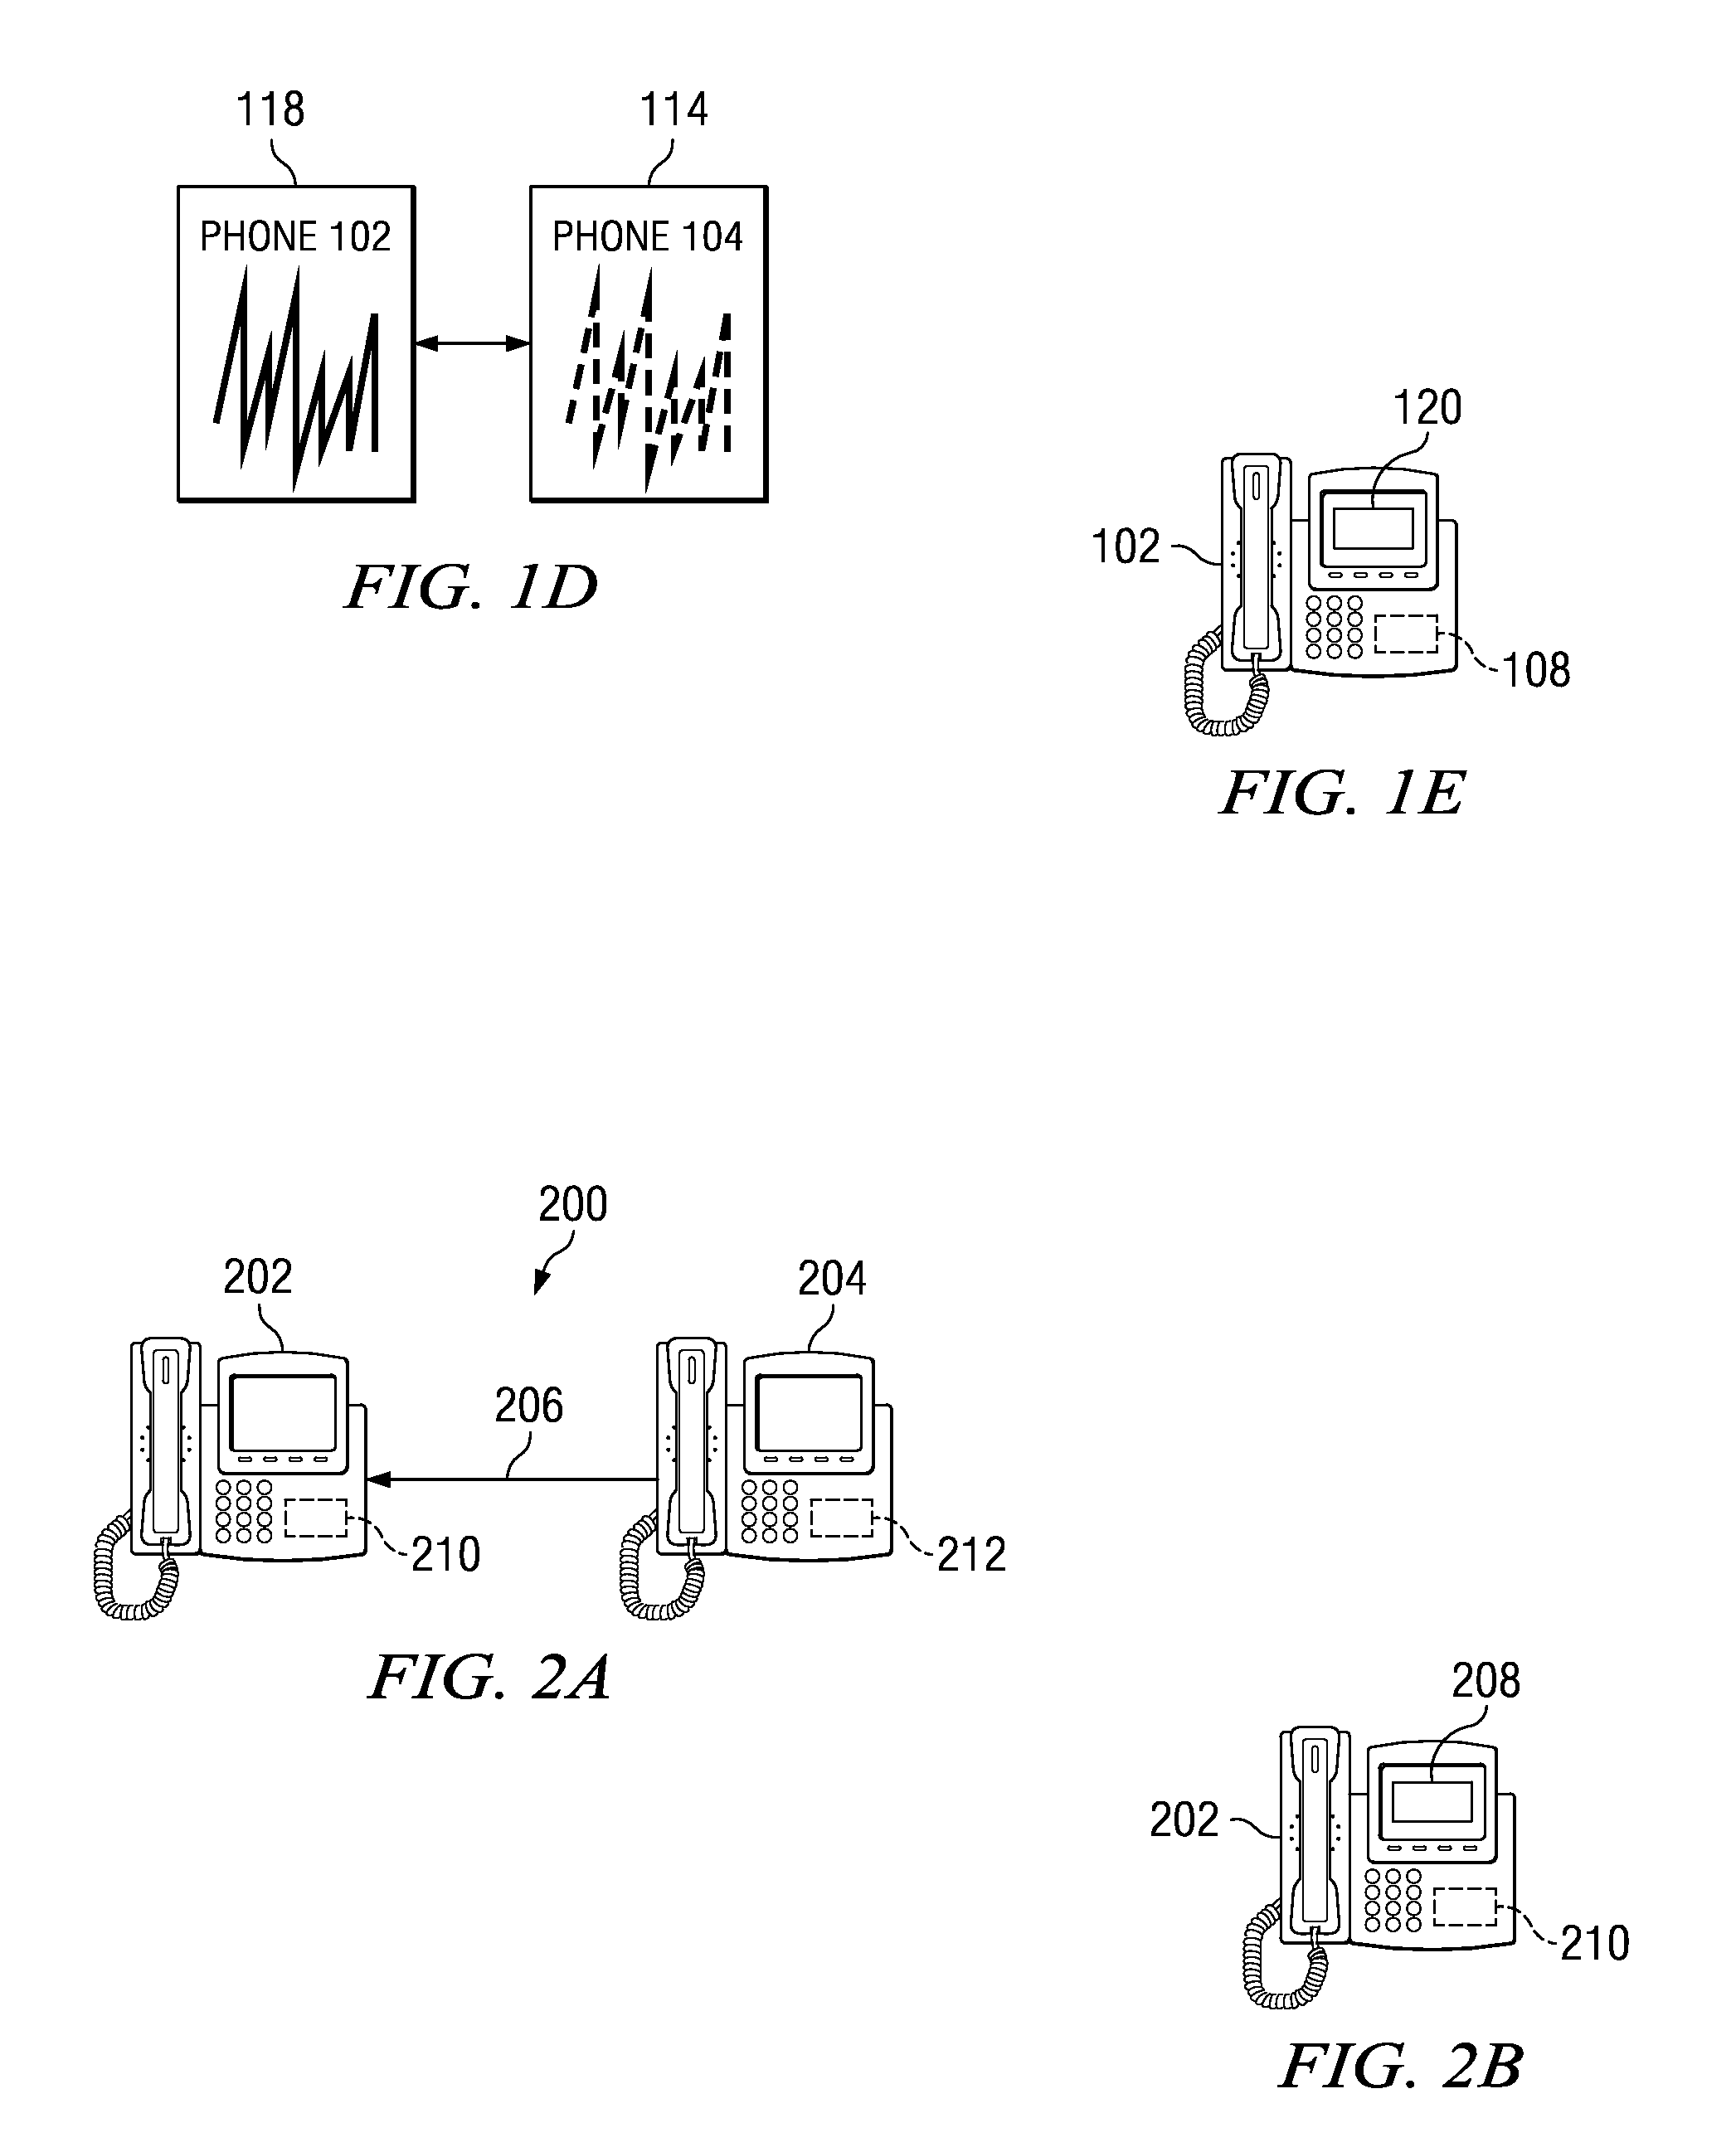 Method and system for notifying a telephone user of an audio problem